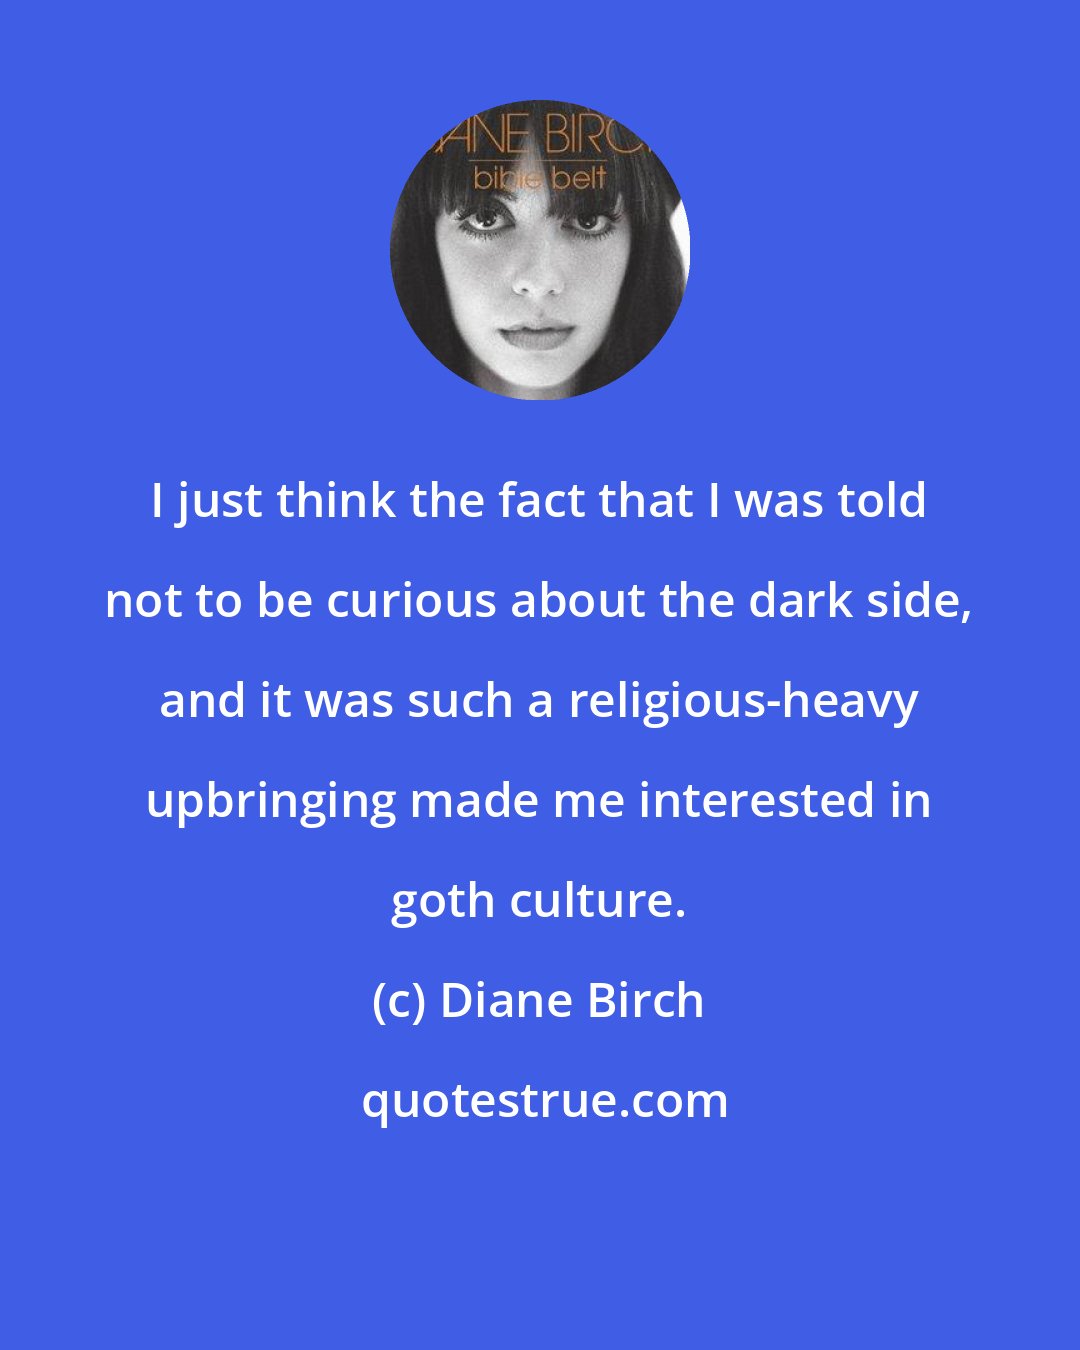 Diane Birch: I just think the fact that I was told not to be curious about the dark side, and it was such a religious-heavy upbringing made me interested in goth culture.